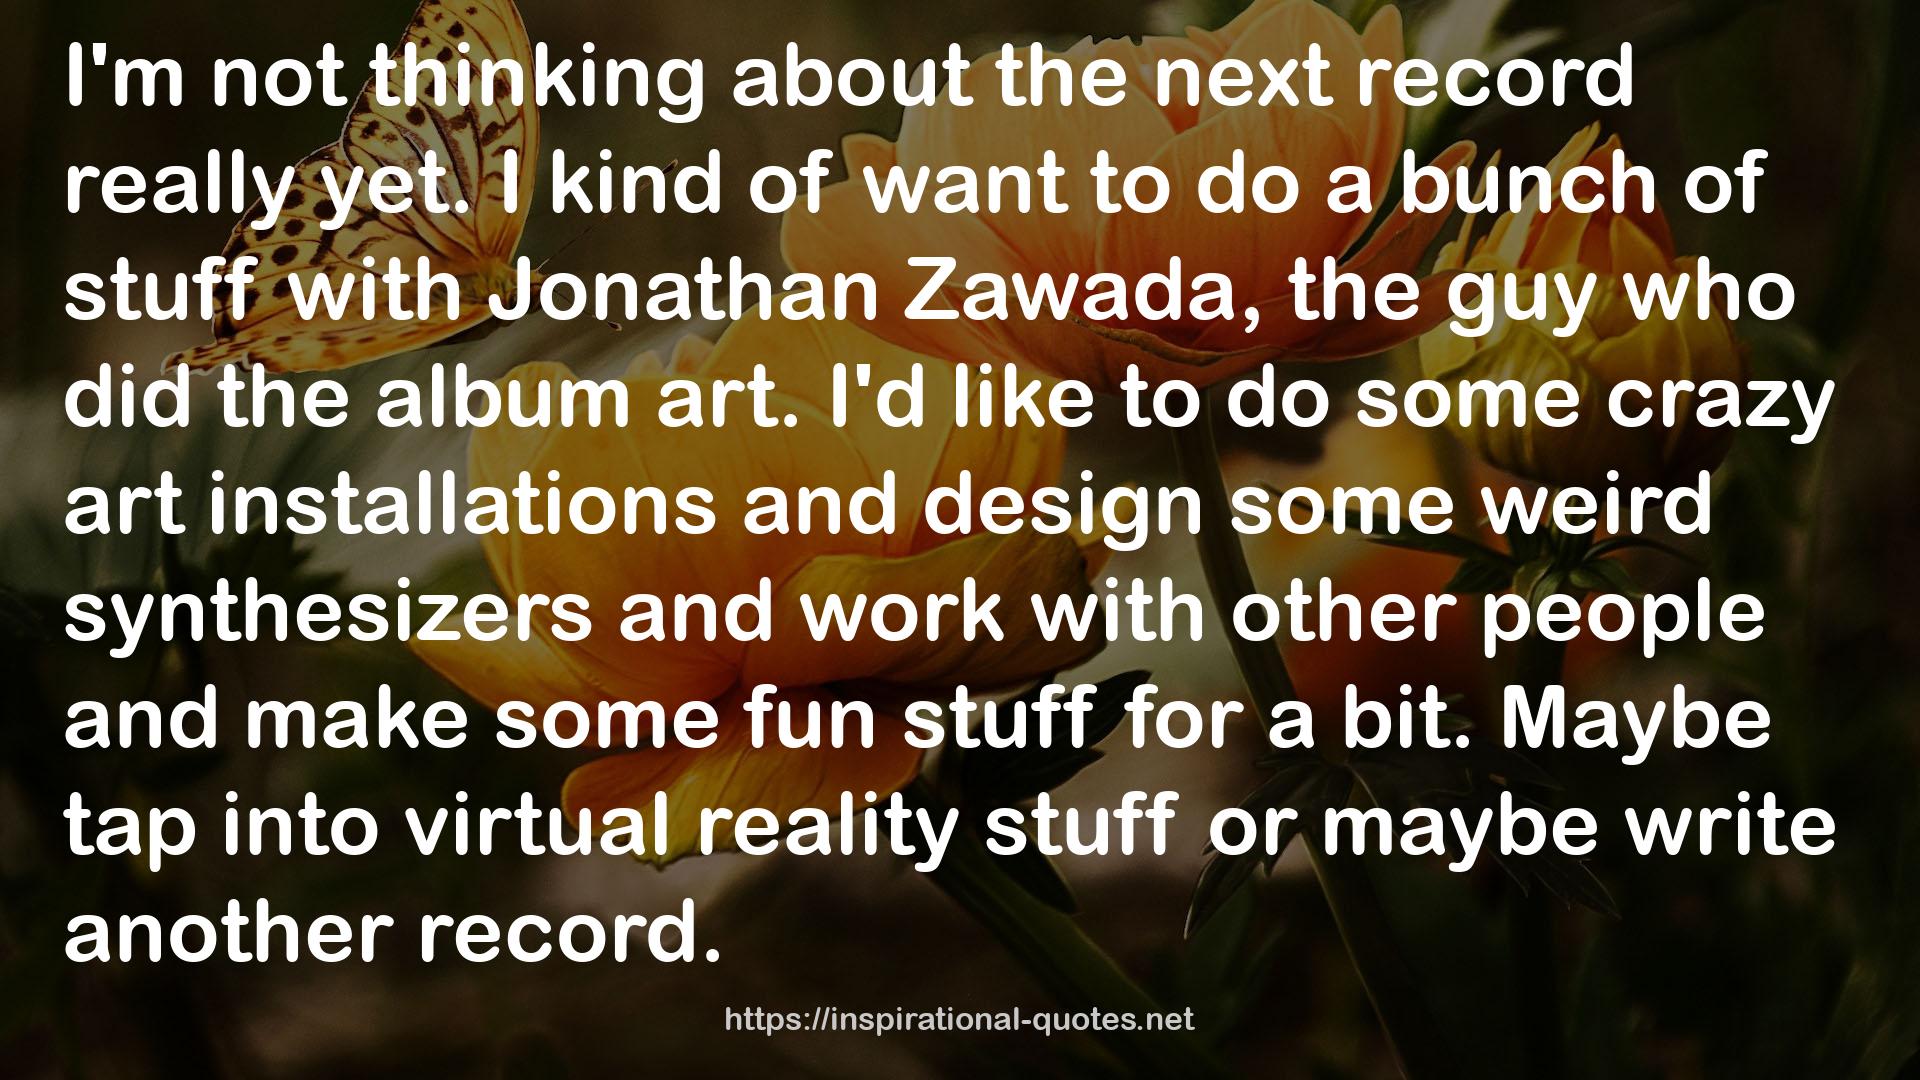 some crazy art installations  QUOTES